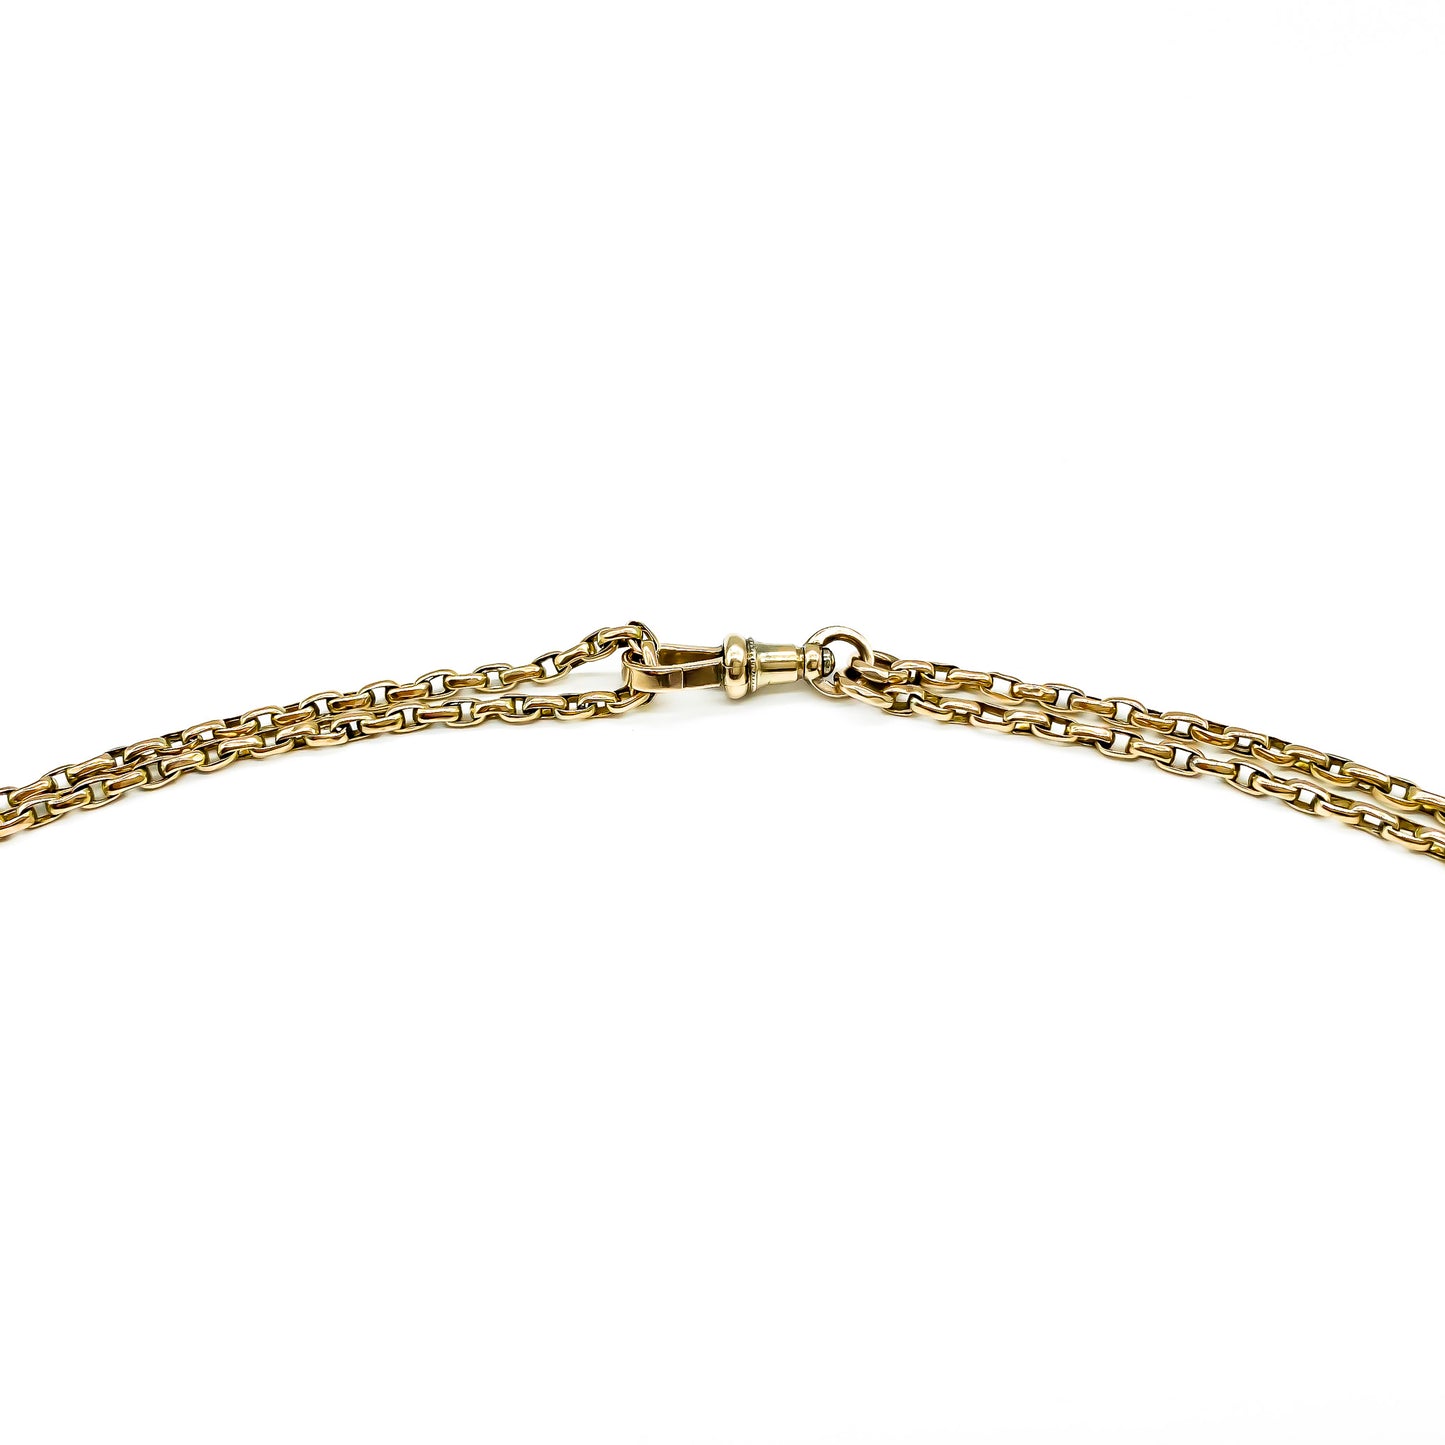 Stylish Victorian 9ct gold box link long guard chain with a dog-clip. Long enough to be draped around the neck two or three times.